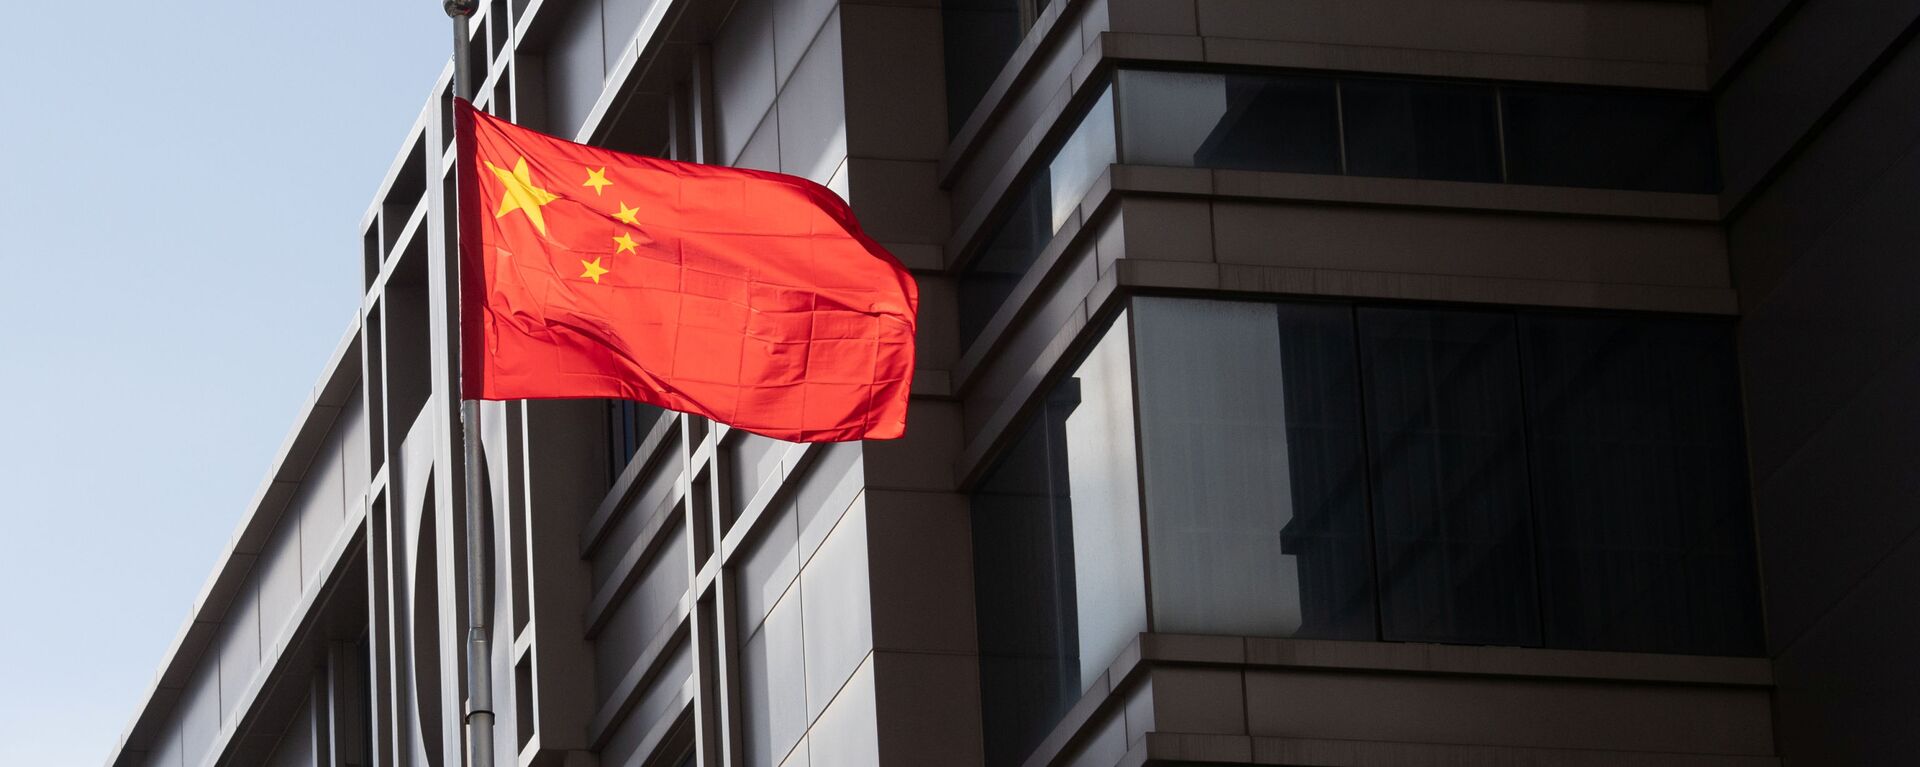 China’s national flag is seen waving at the China Consulate General in Houston, Texas, U.S., July 22, 2020 - Sputnik International, 1920, 13.08.2020